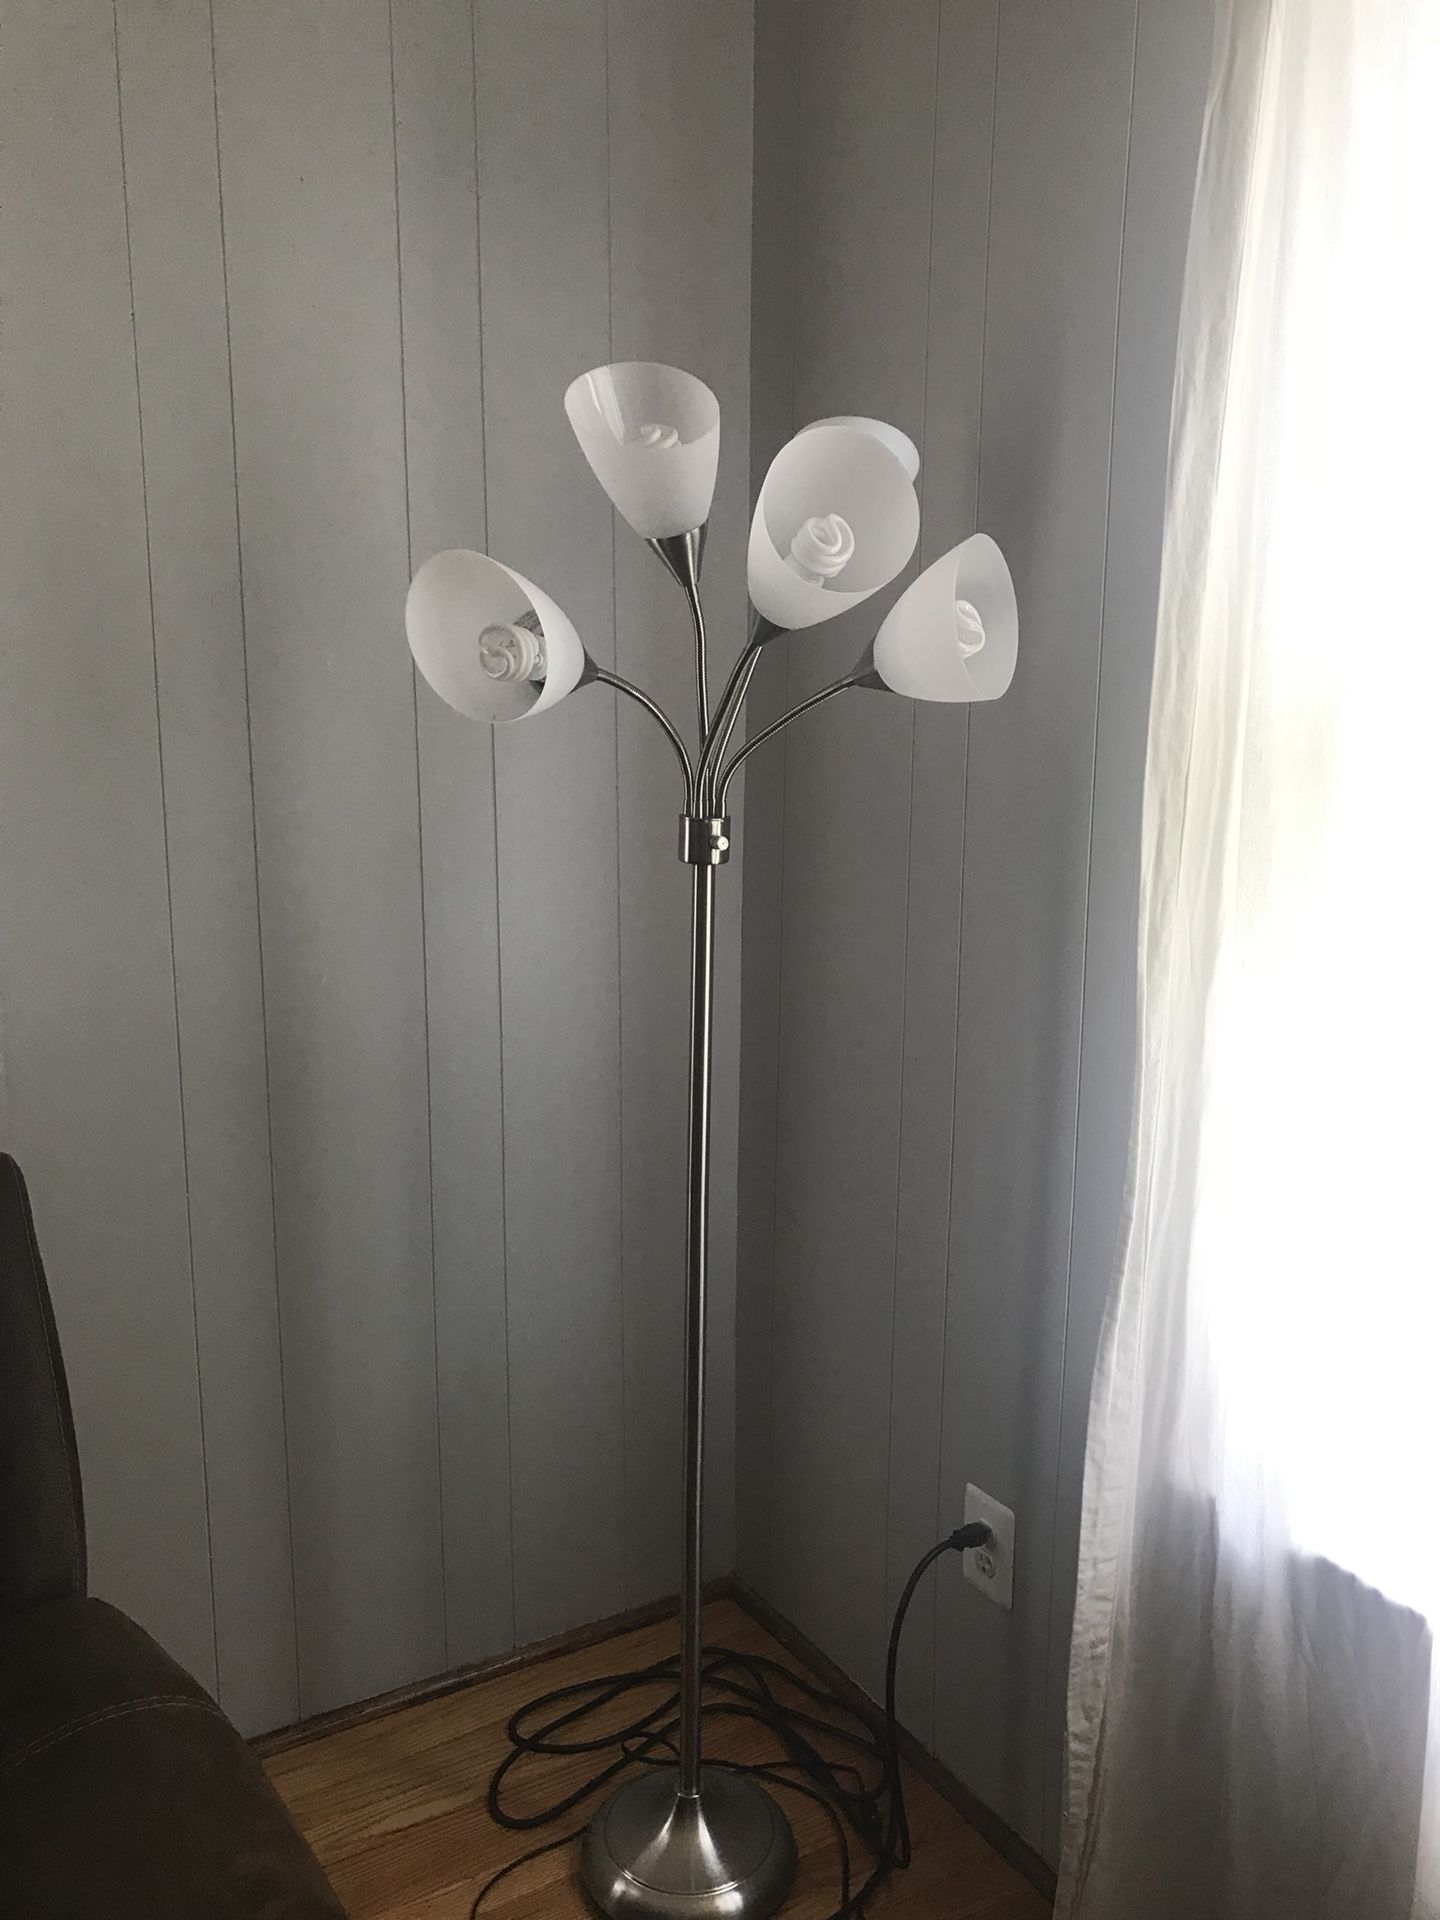 5 light floor lamp with cfl bulbs (two lamps)